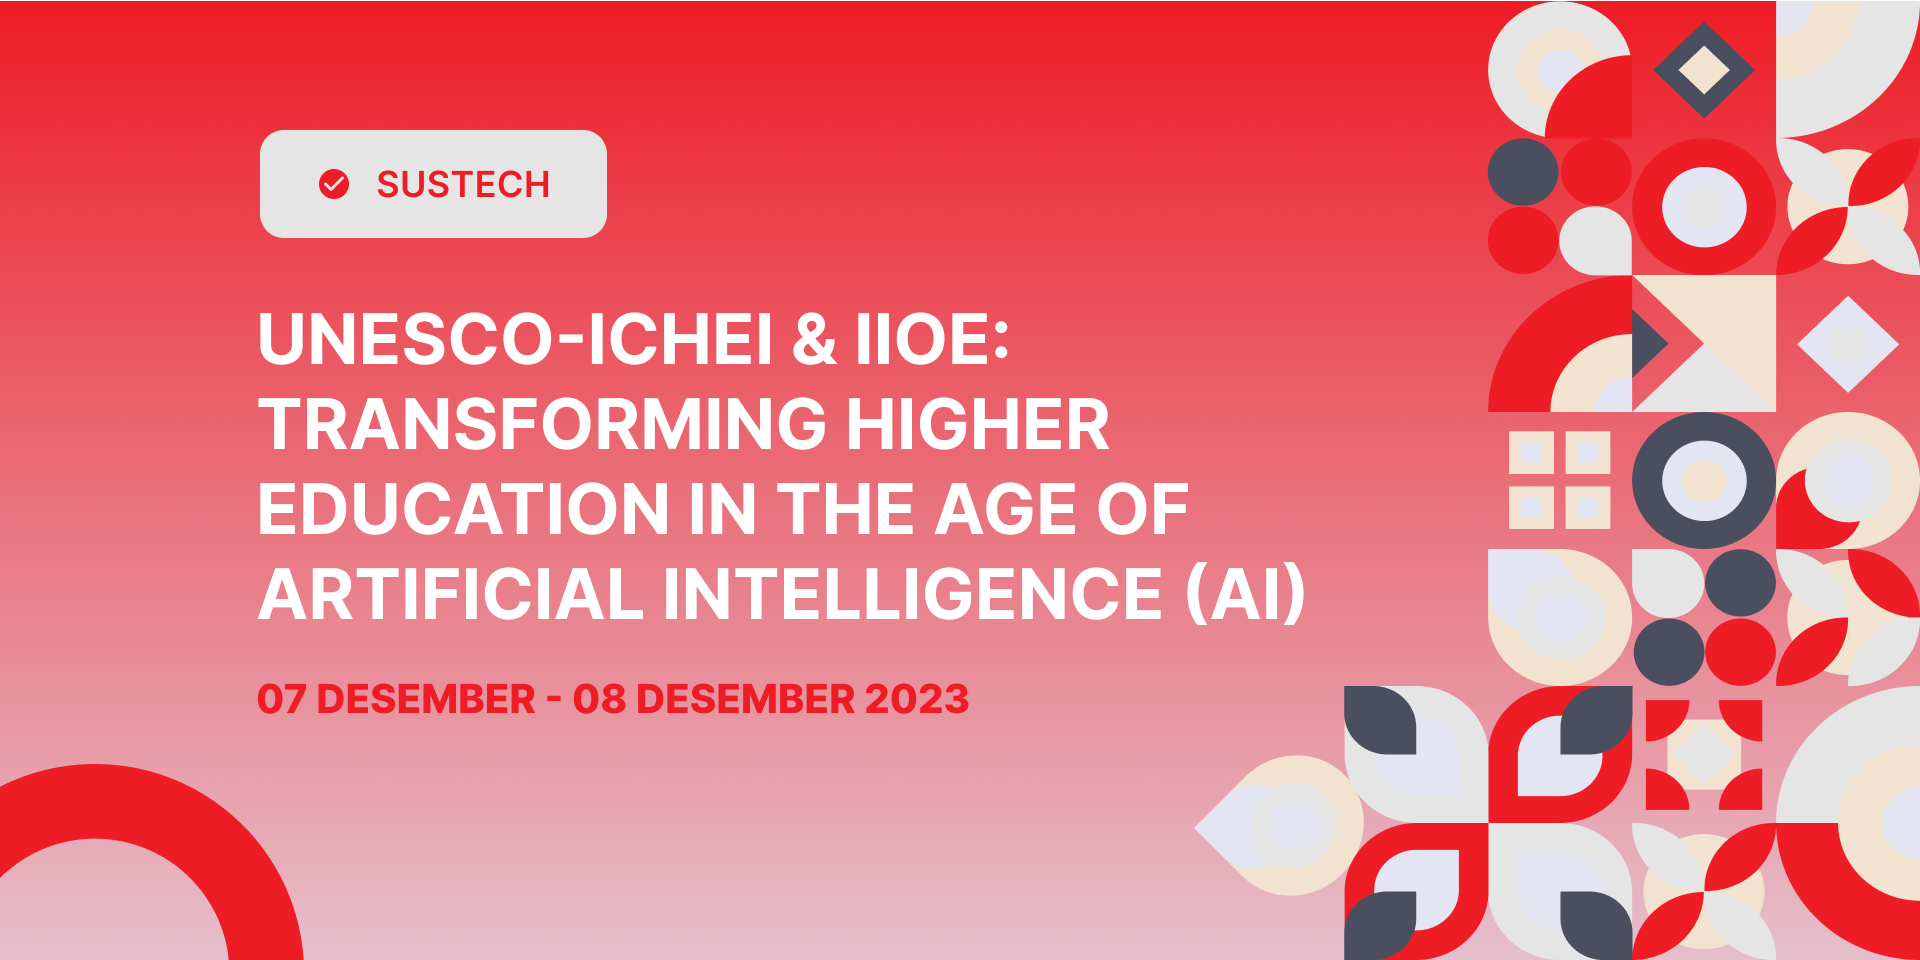 unesco-ichei-iioe-transforming-higher-education-in-the-age-of-artificial-intelligence-ai